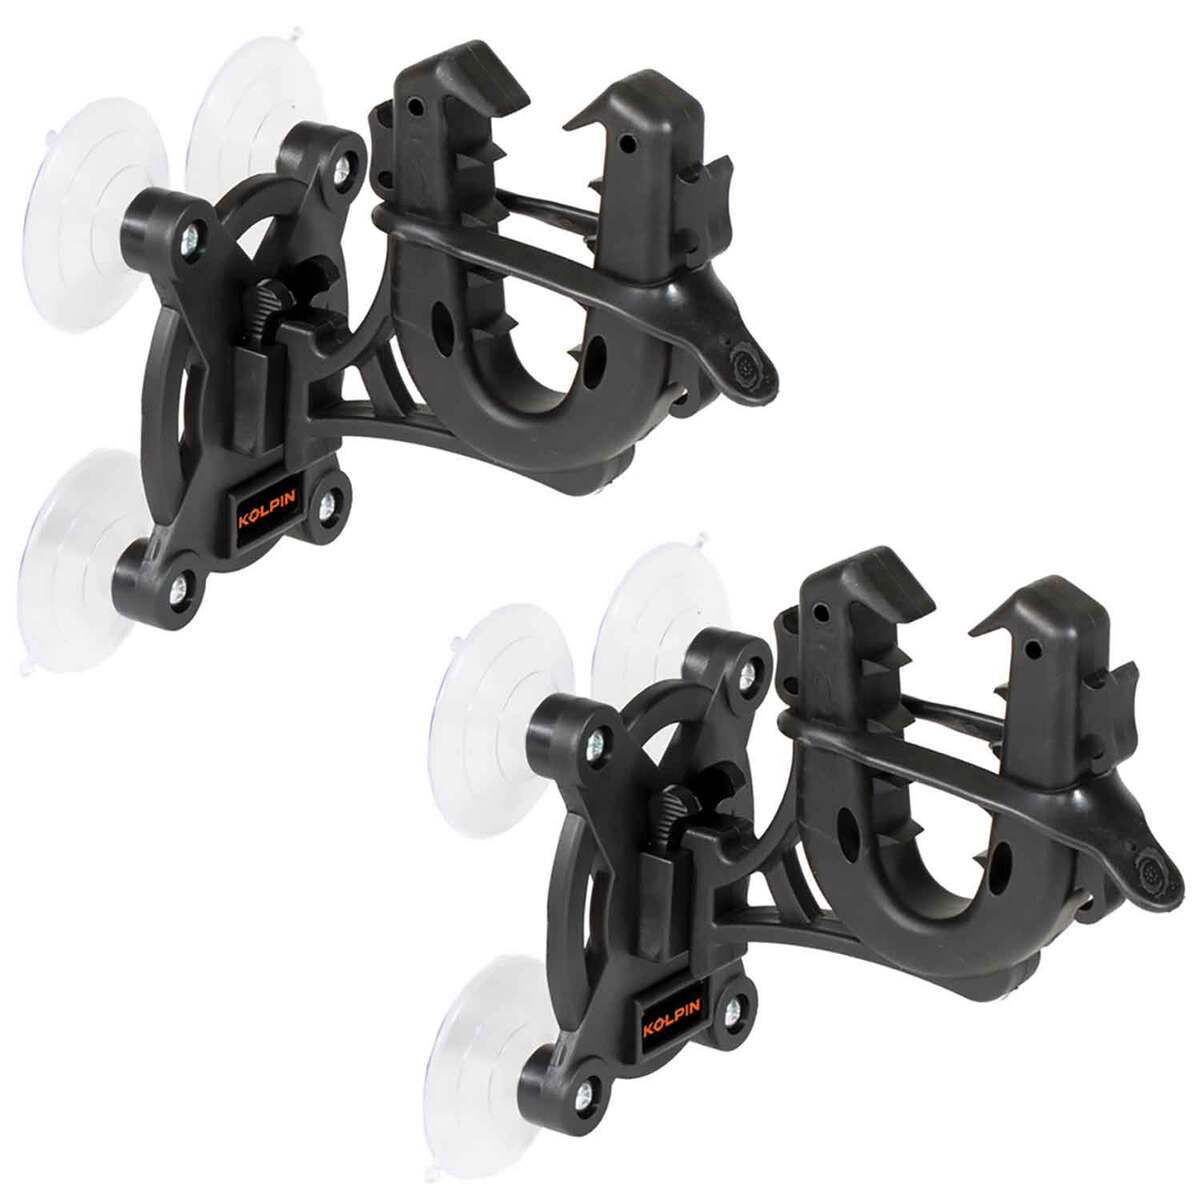 Fishing Rod Holders with Suction Cups Attach For Car/Truck/SUV/Smooth Glass